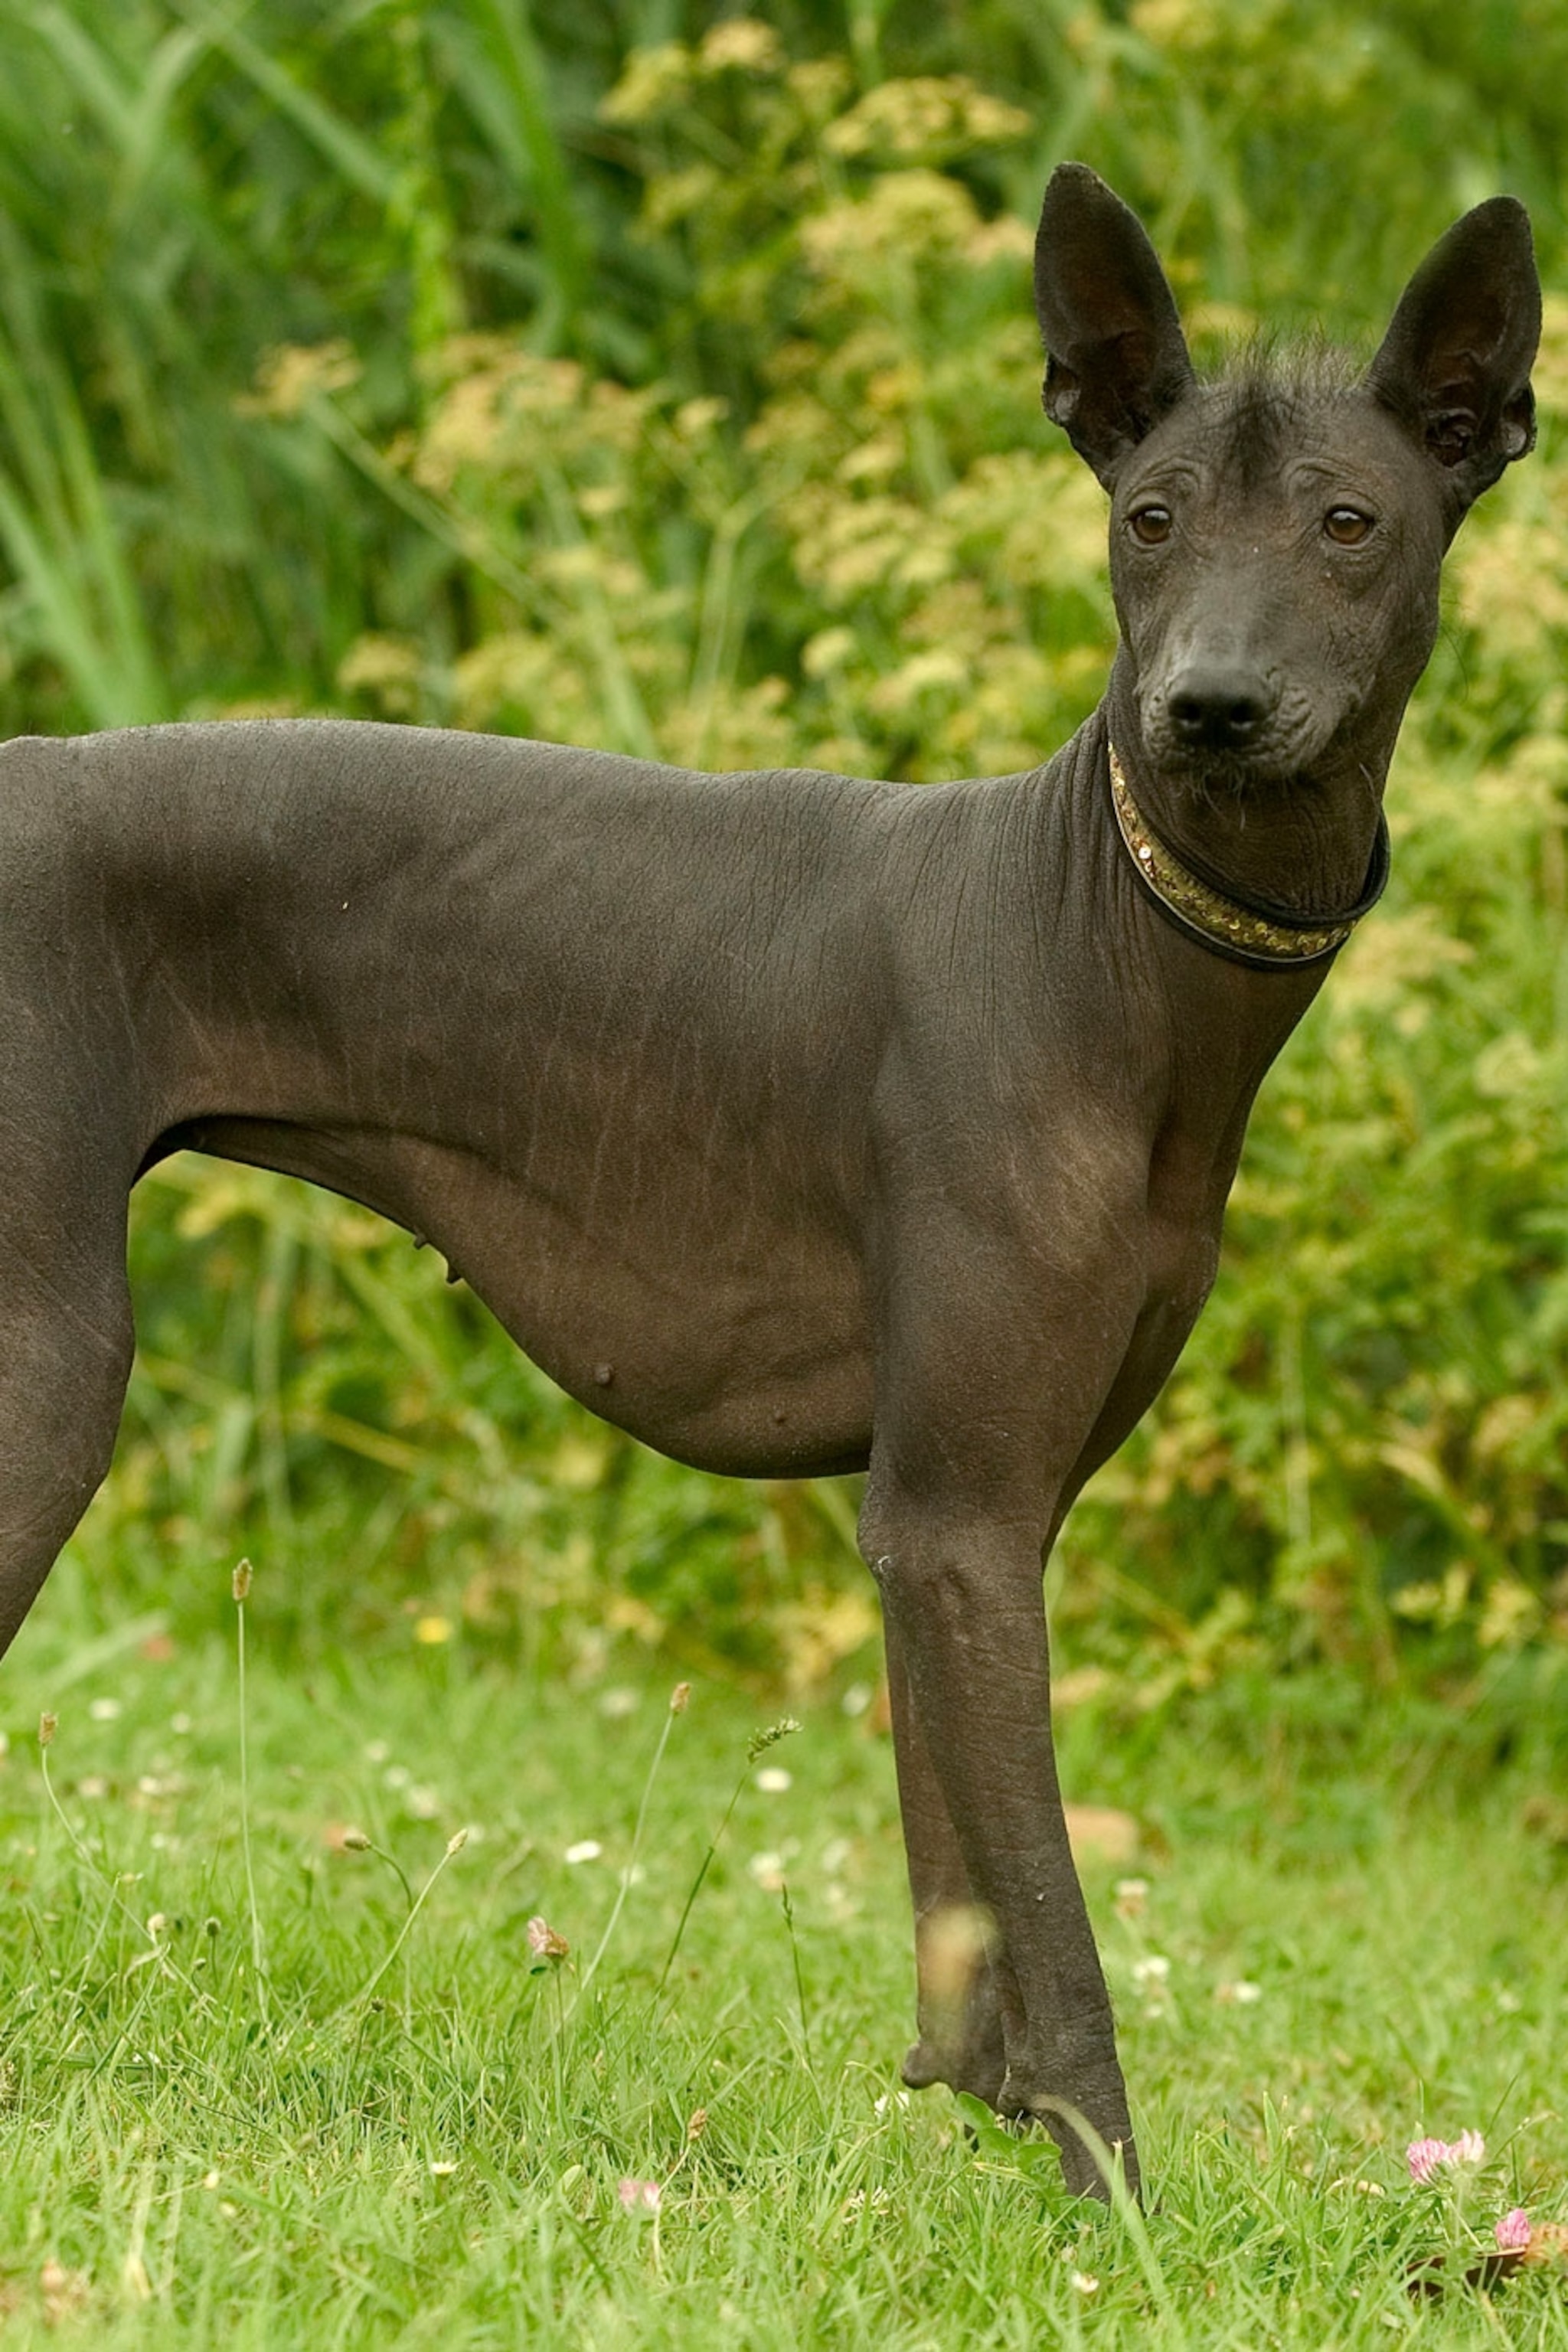 Why are Mexican hairless dogs hairless?